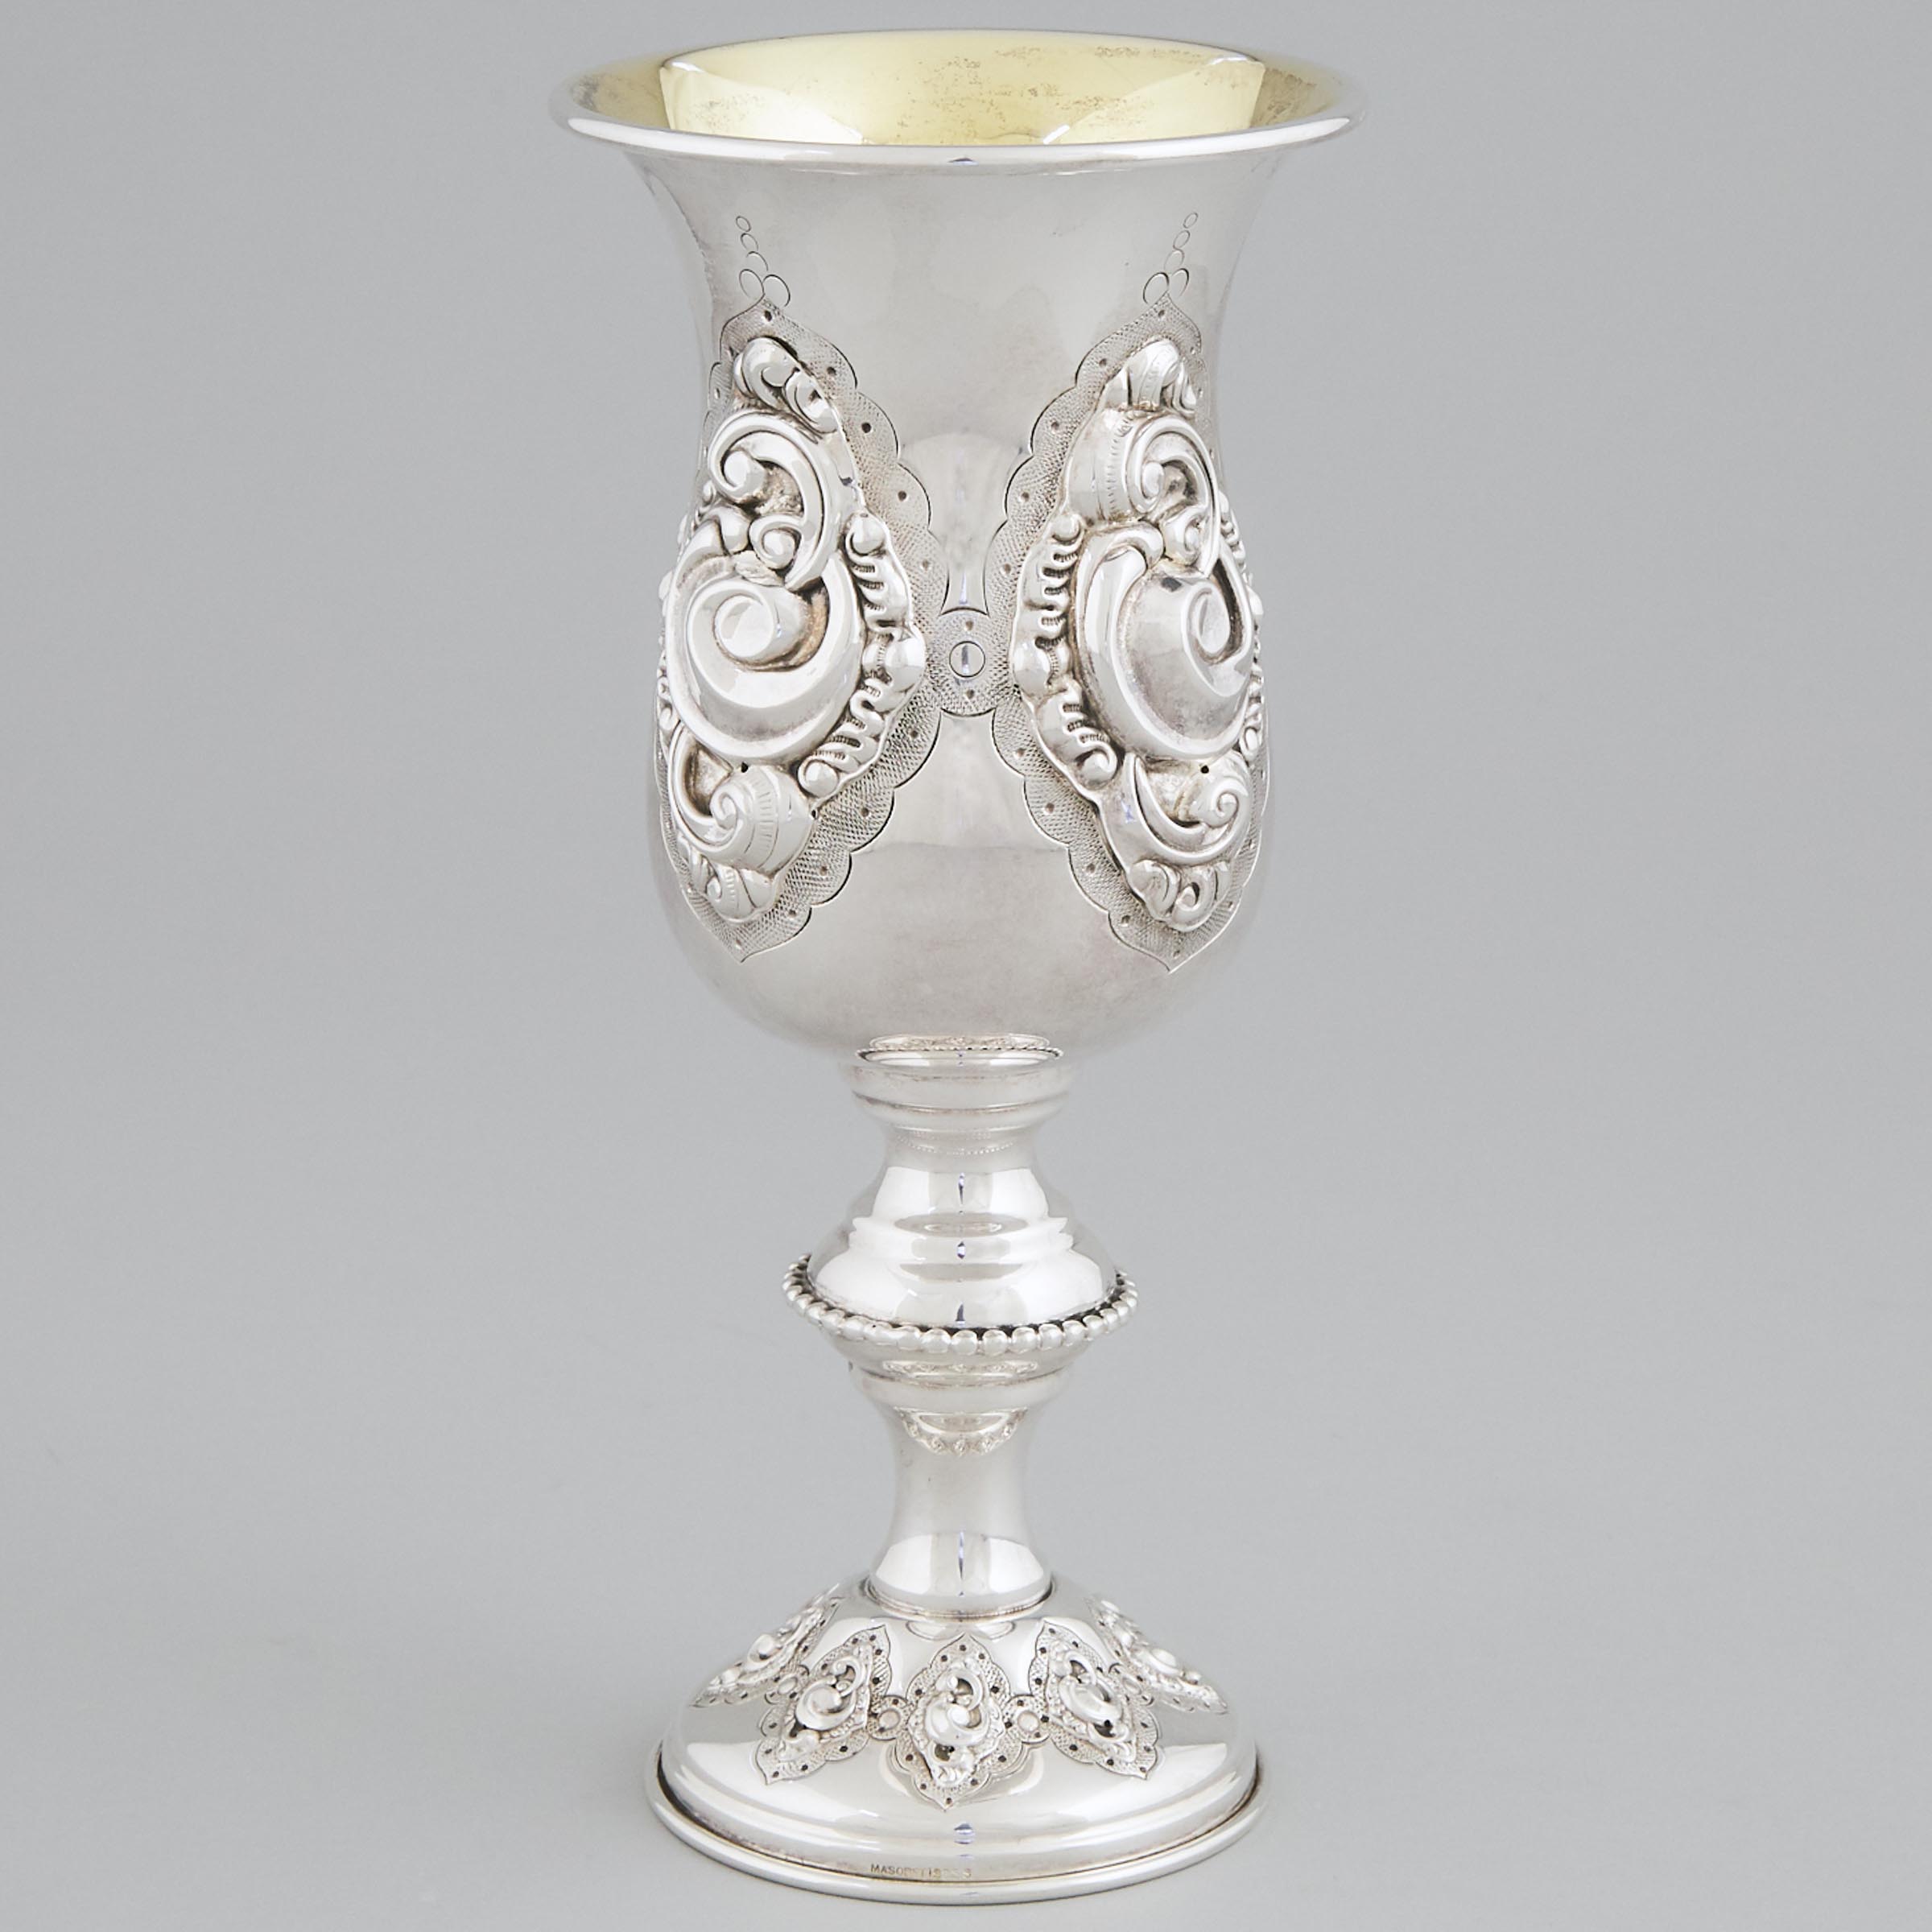 Continental Silver Large Goblet, Masorftt, 20th century